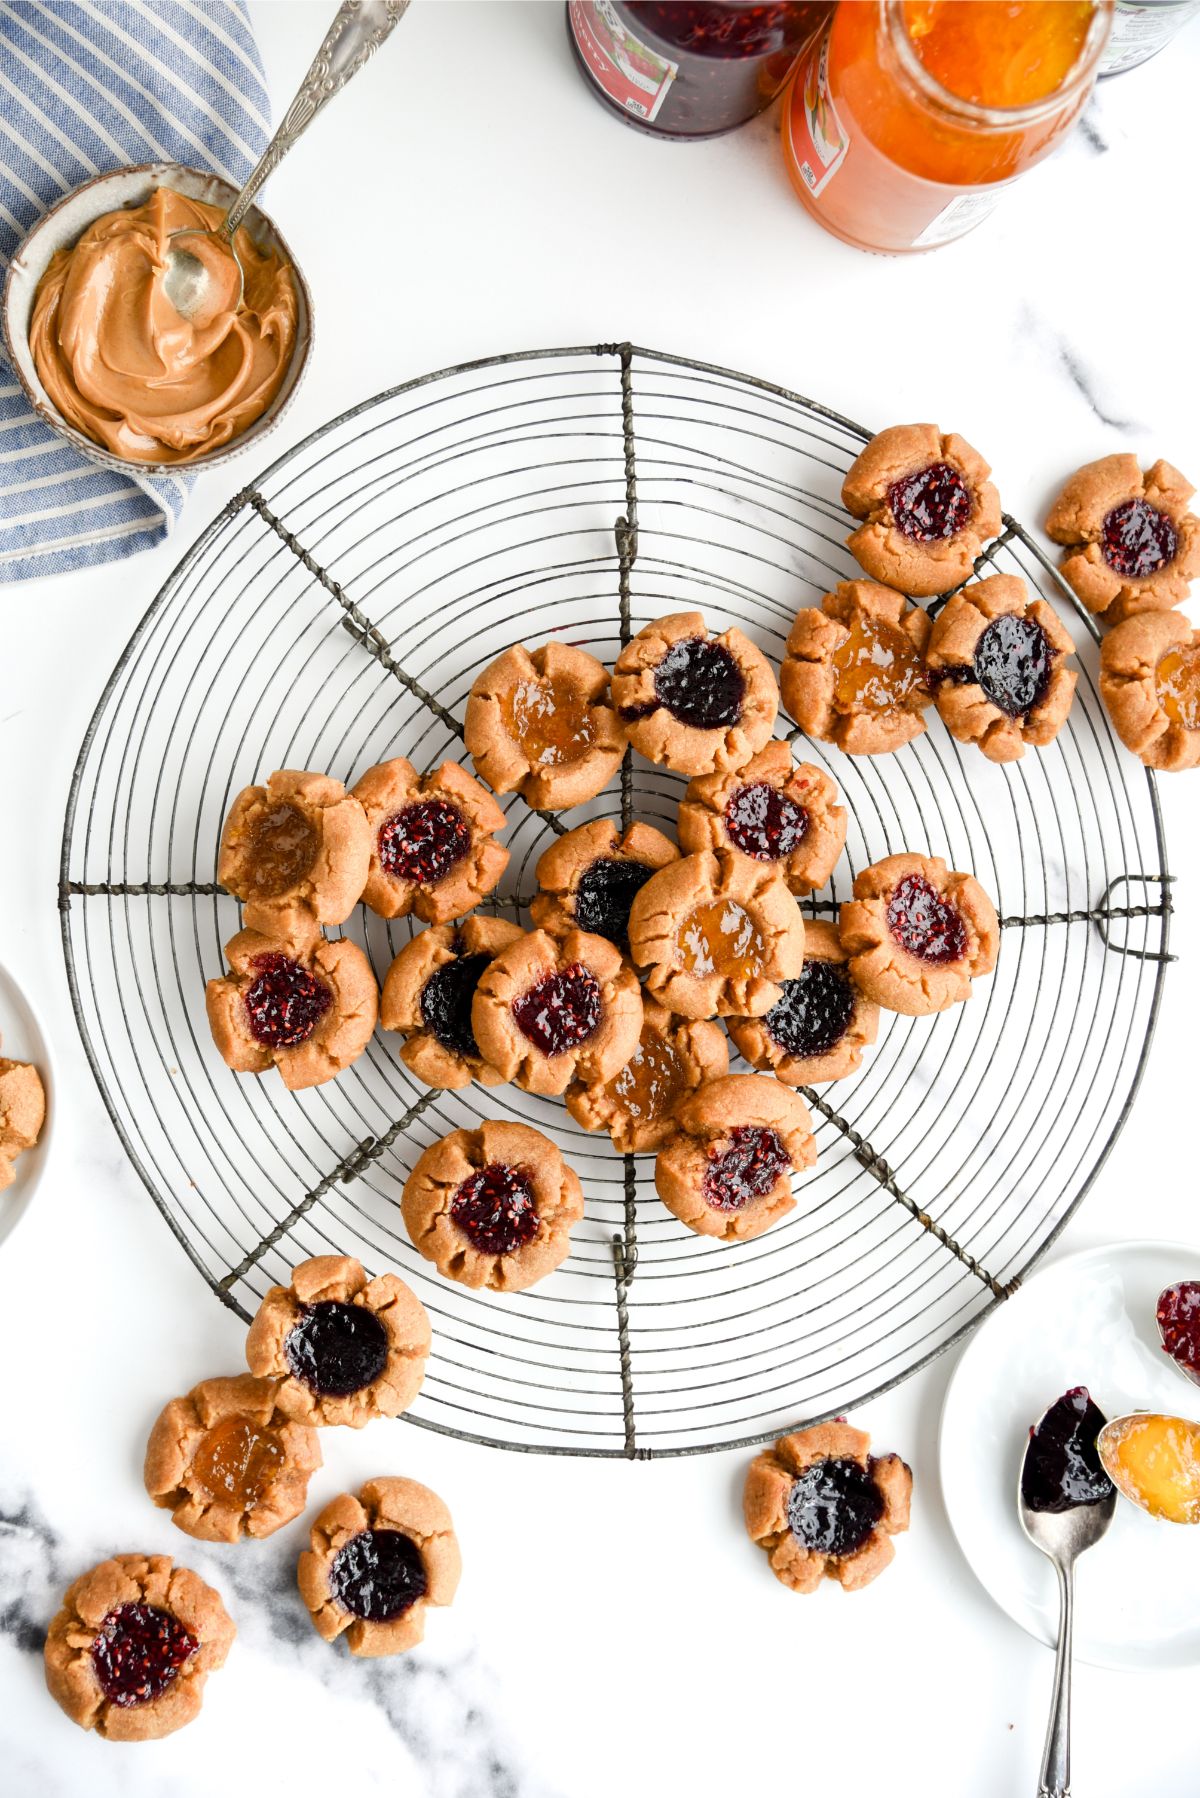 Top view of 5 Ingredient Peanut Butter and Jam Thumbprint Cookies on a cooling rack.